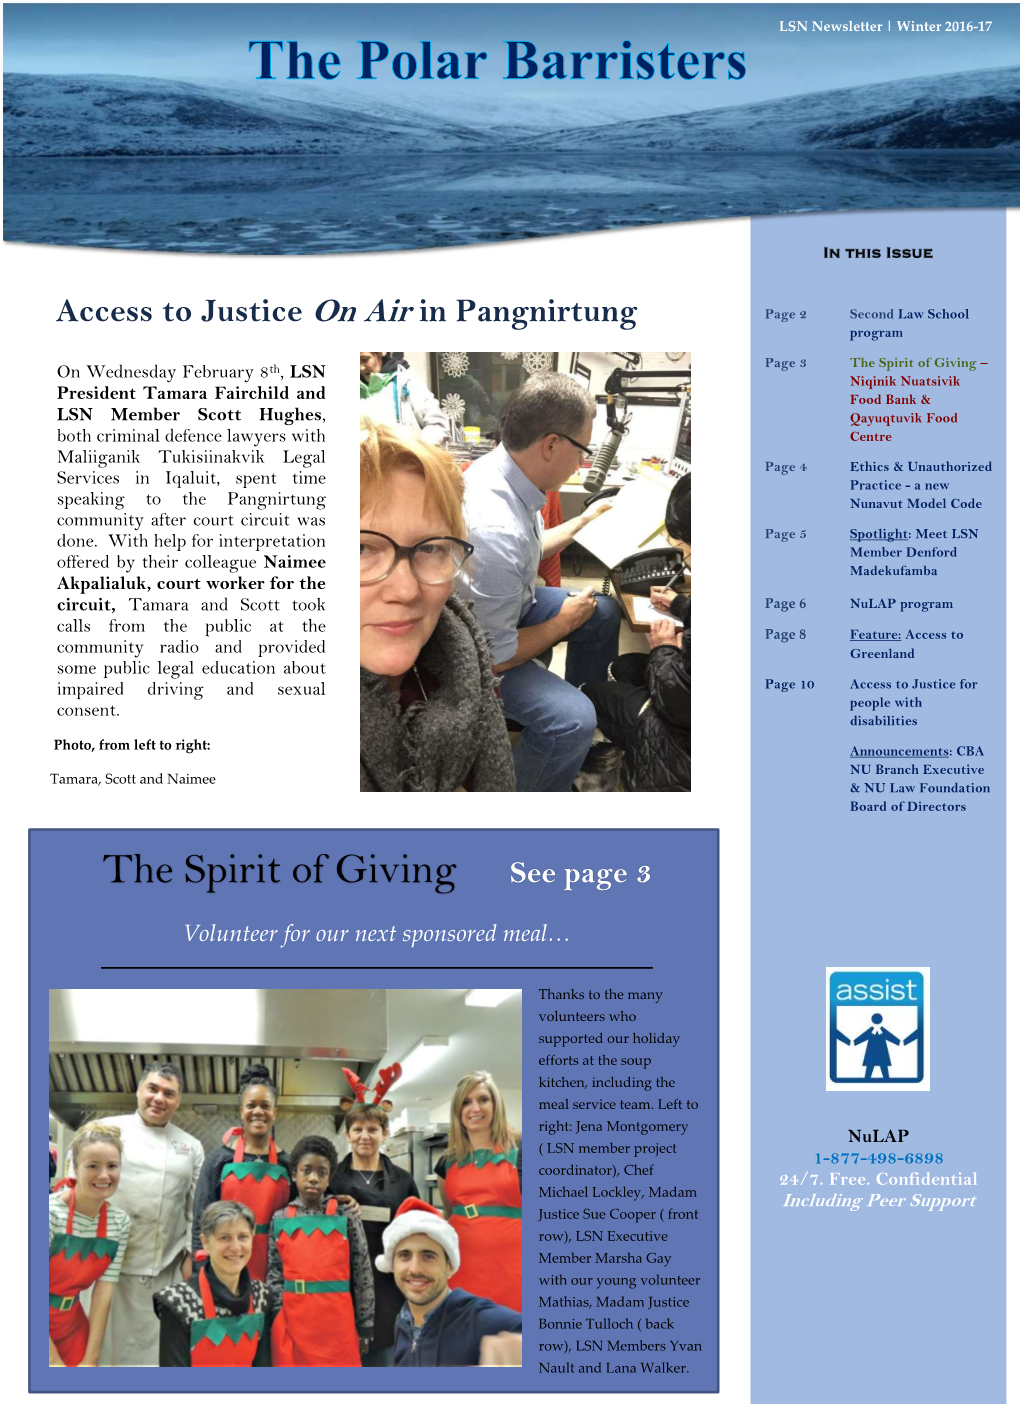 The Spirit of Giving See Page 3